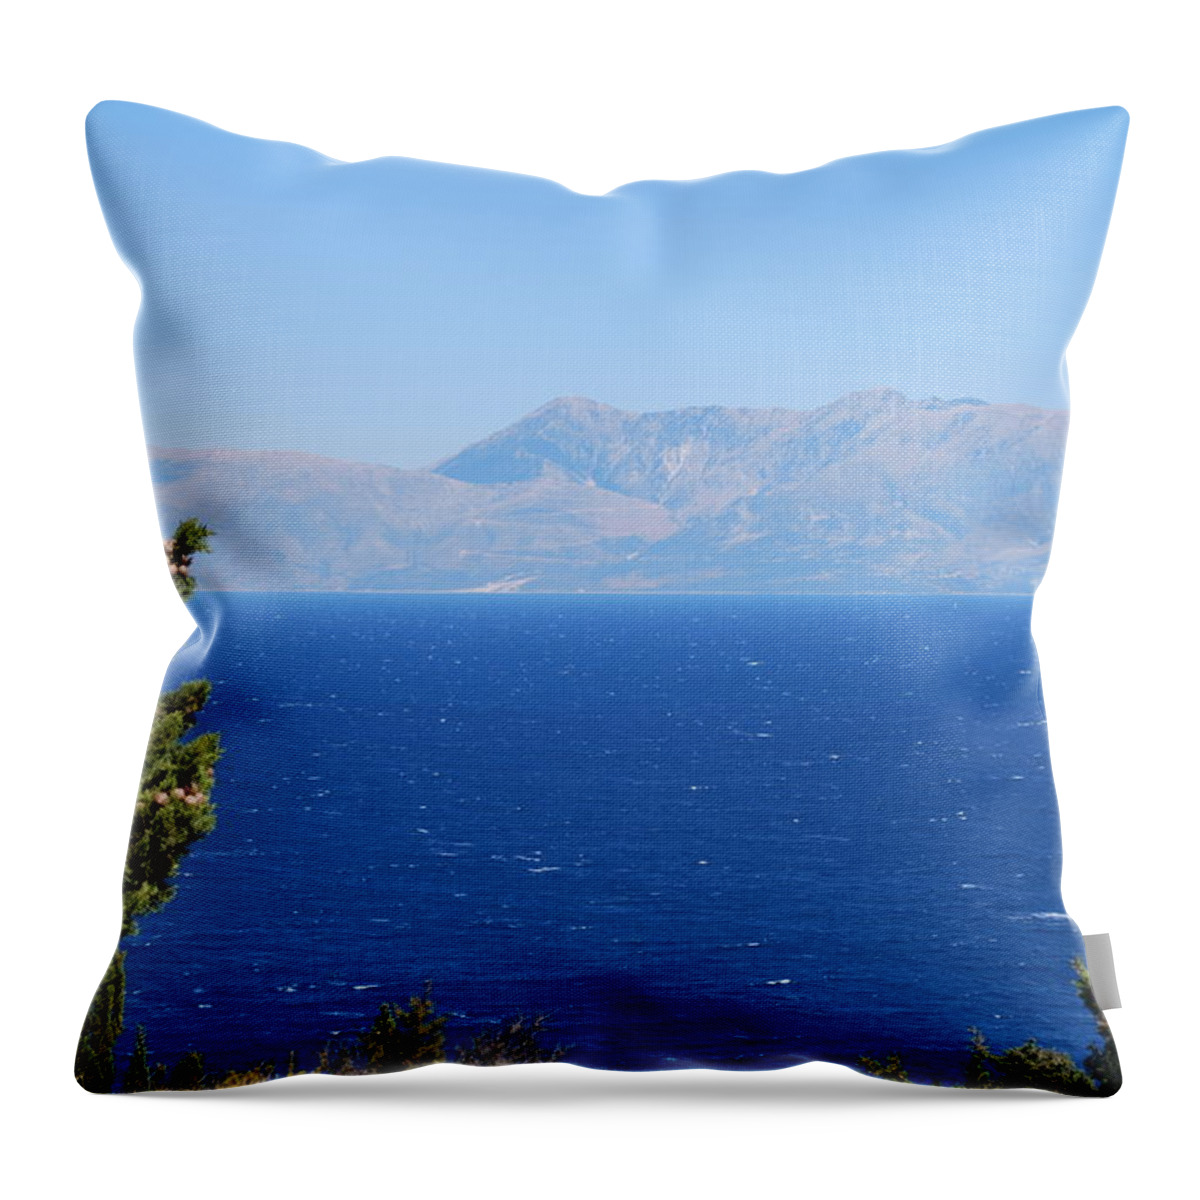 Mistral Wind Throw Pillow featuring the photograph Mistral wind by George Katechis